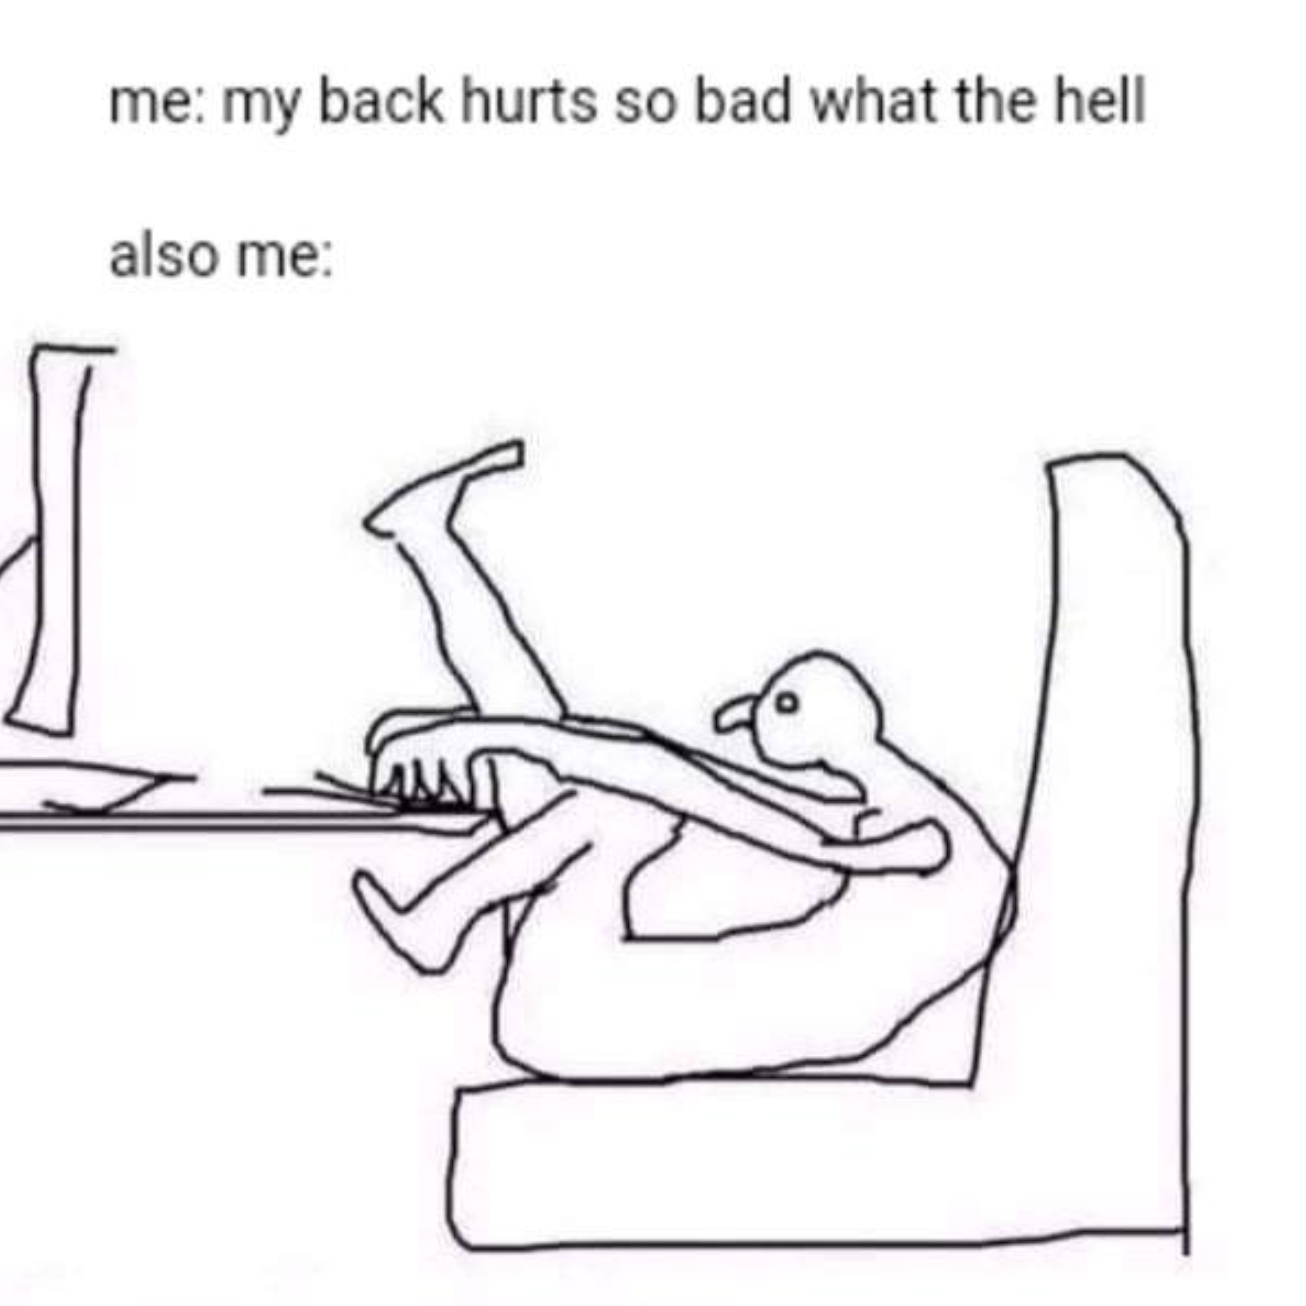 gaming memes - don t know why my back hurts meme - me my back hurts so bad what the hell also me